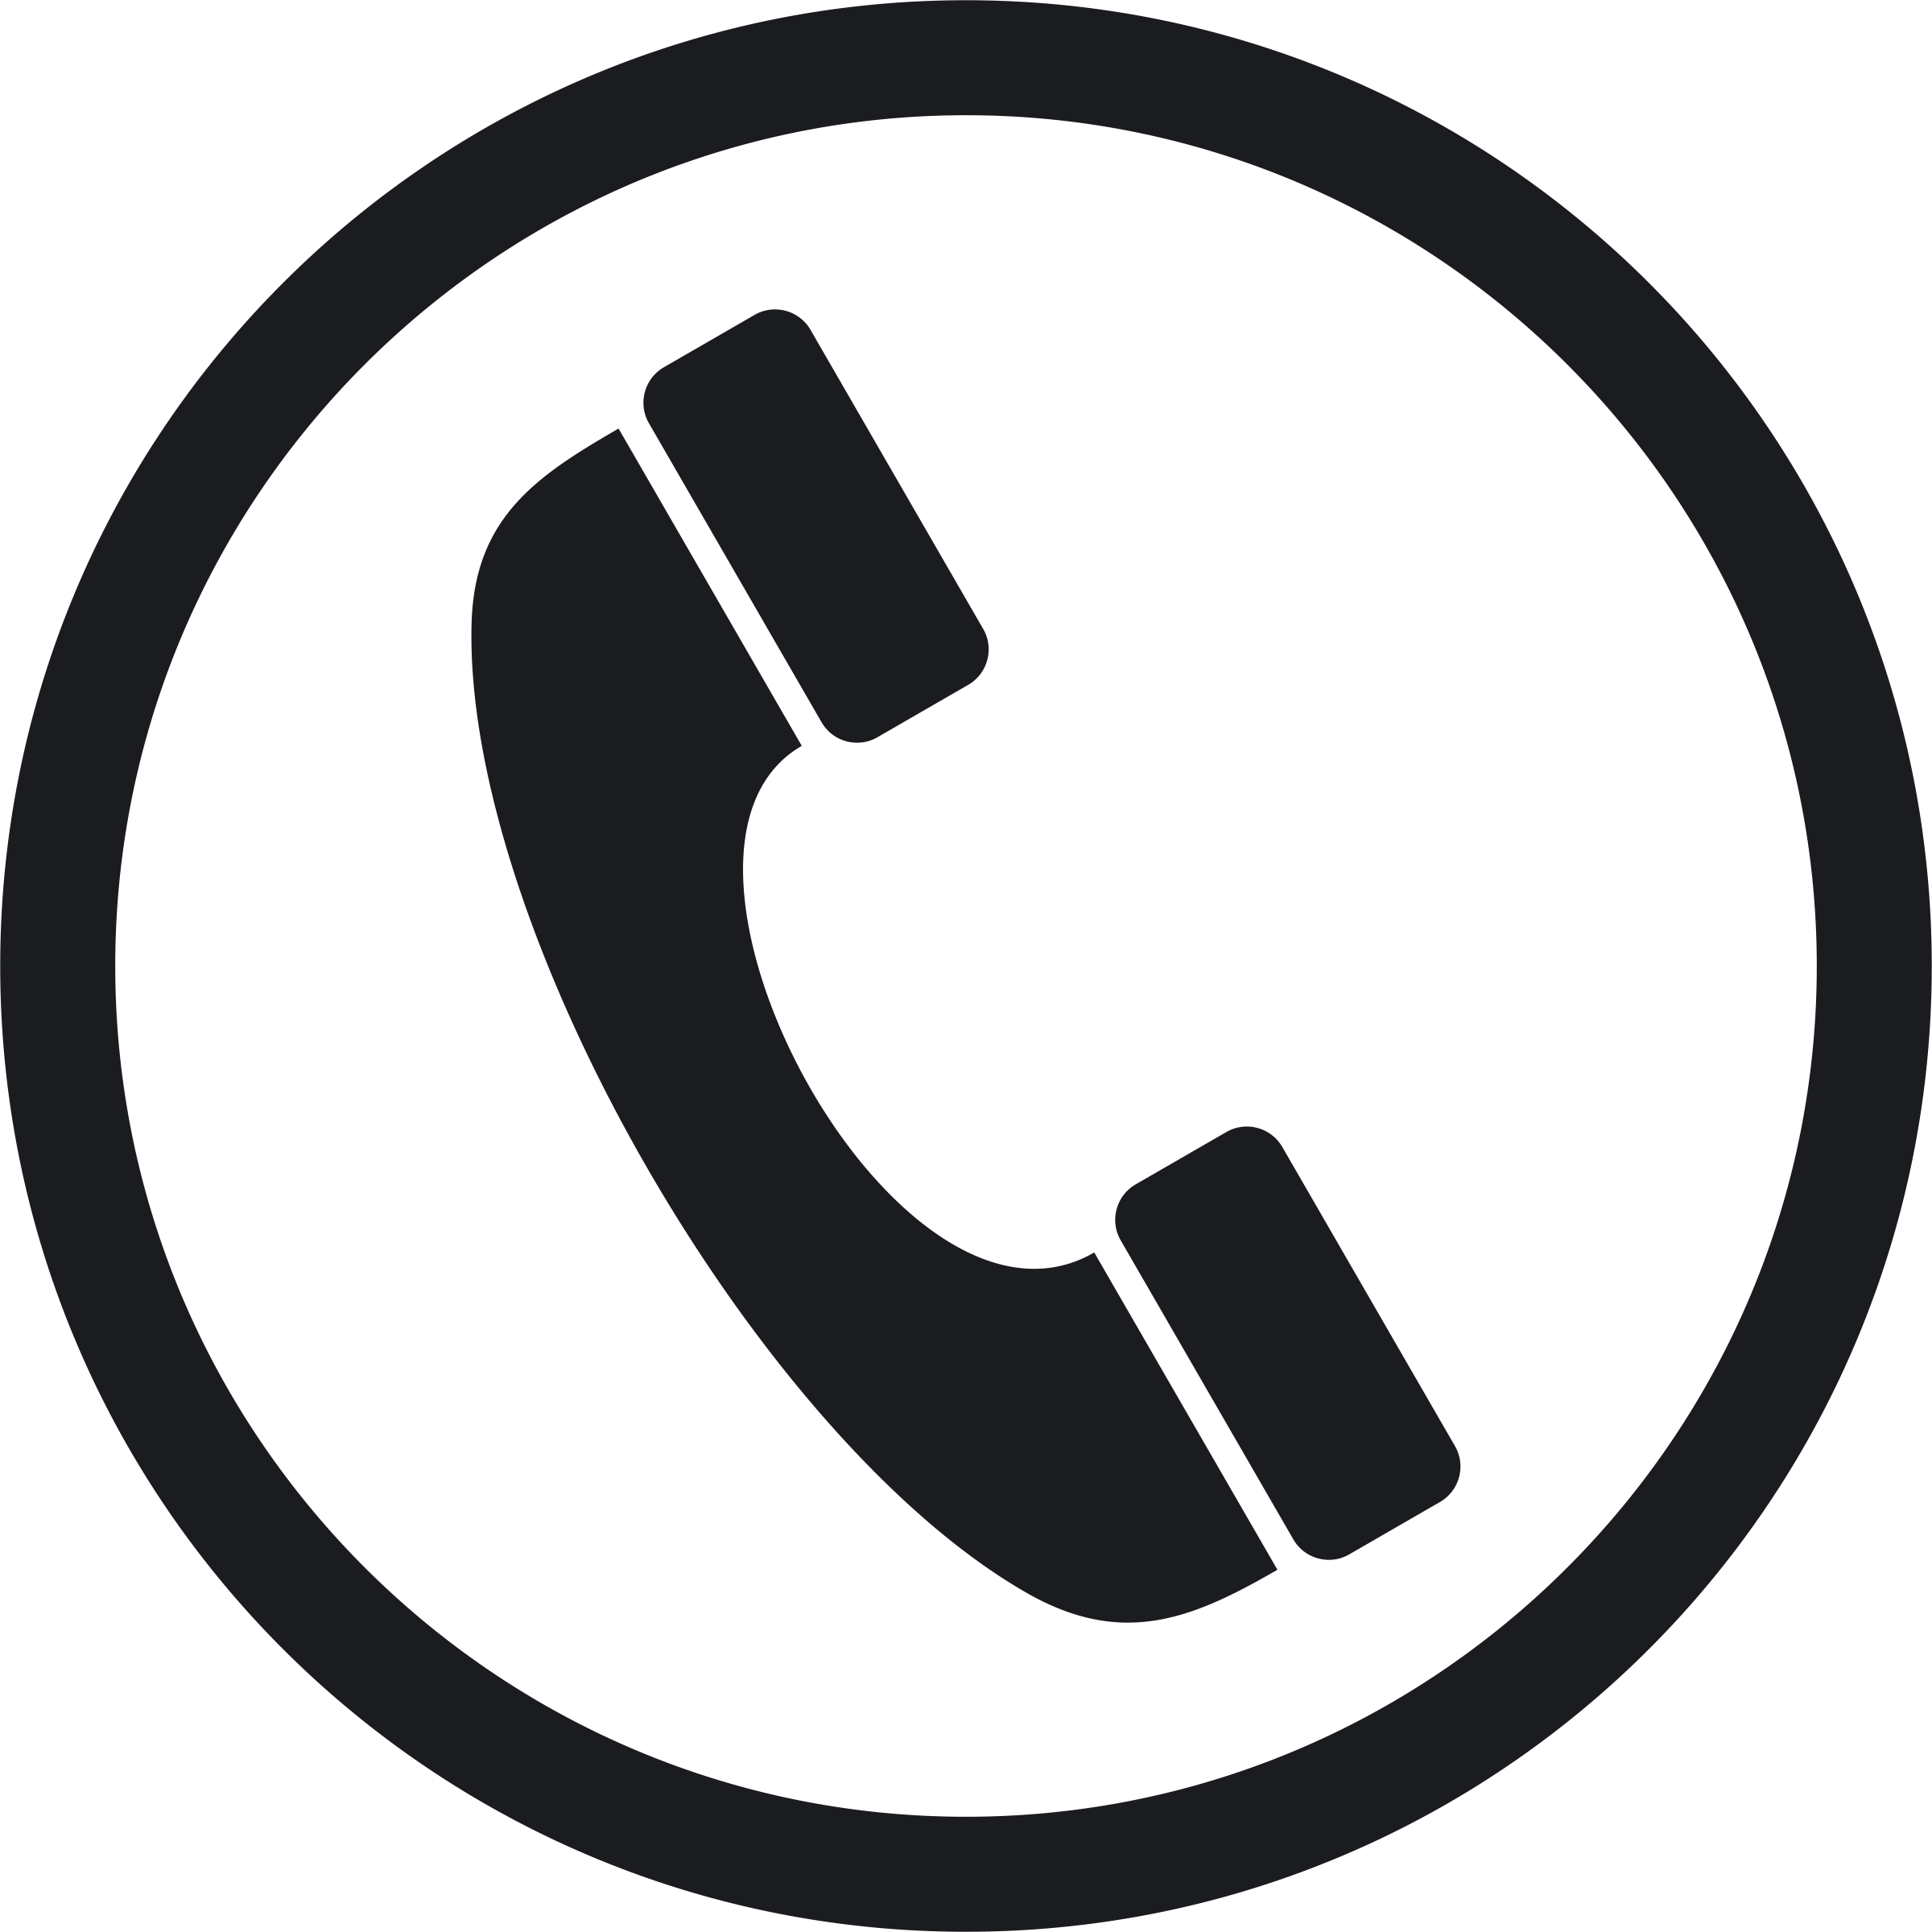 Monochrome round phone icon. Image of old phone in black clip 